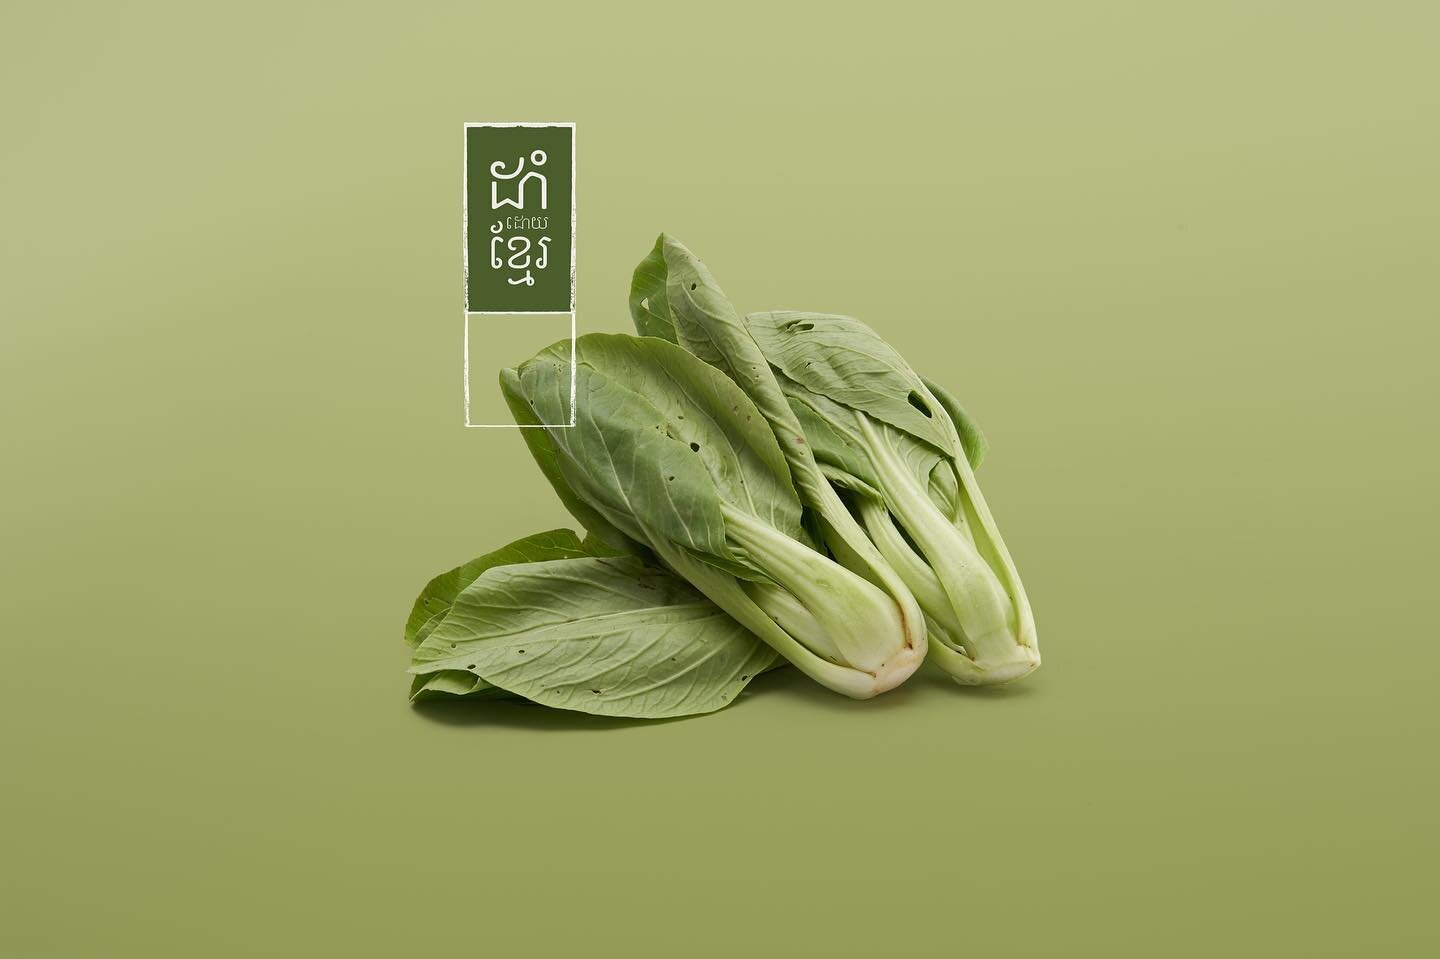 Bok Choy. 
 
From a recent campaign shoot with Melon Rouge for Planted by Khmer. 

#studiophotography #foodphotography #advertisingphotography #sonya7iii #captureonepro #cambodia #phnompenh